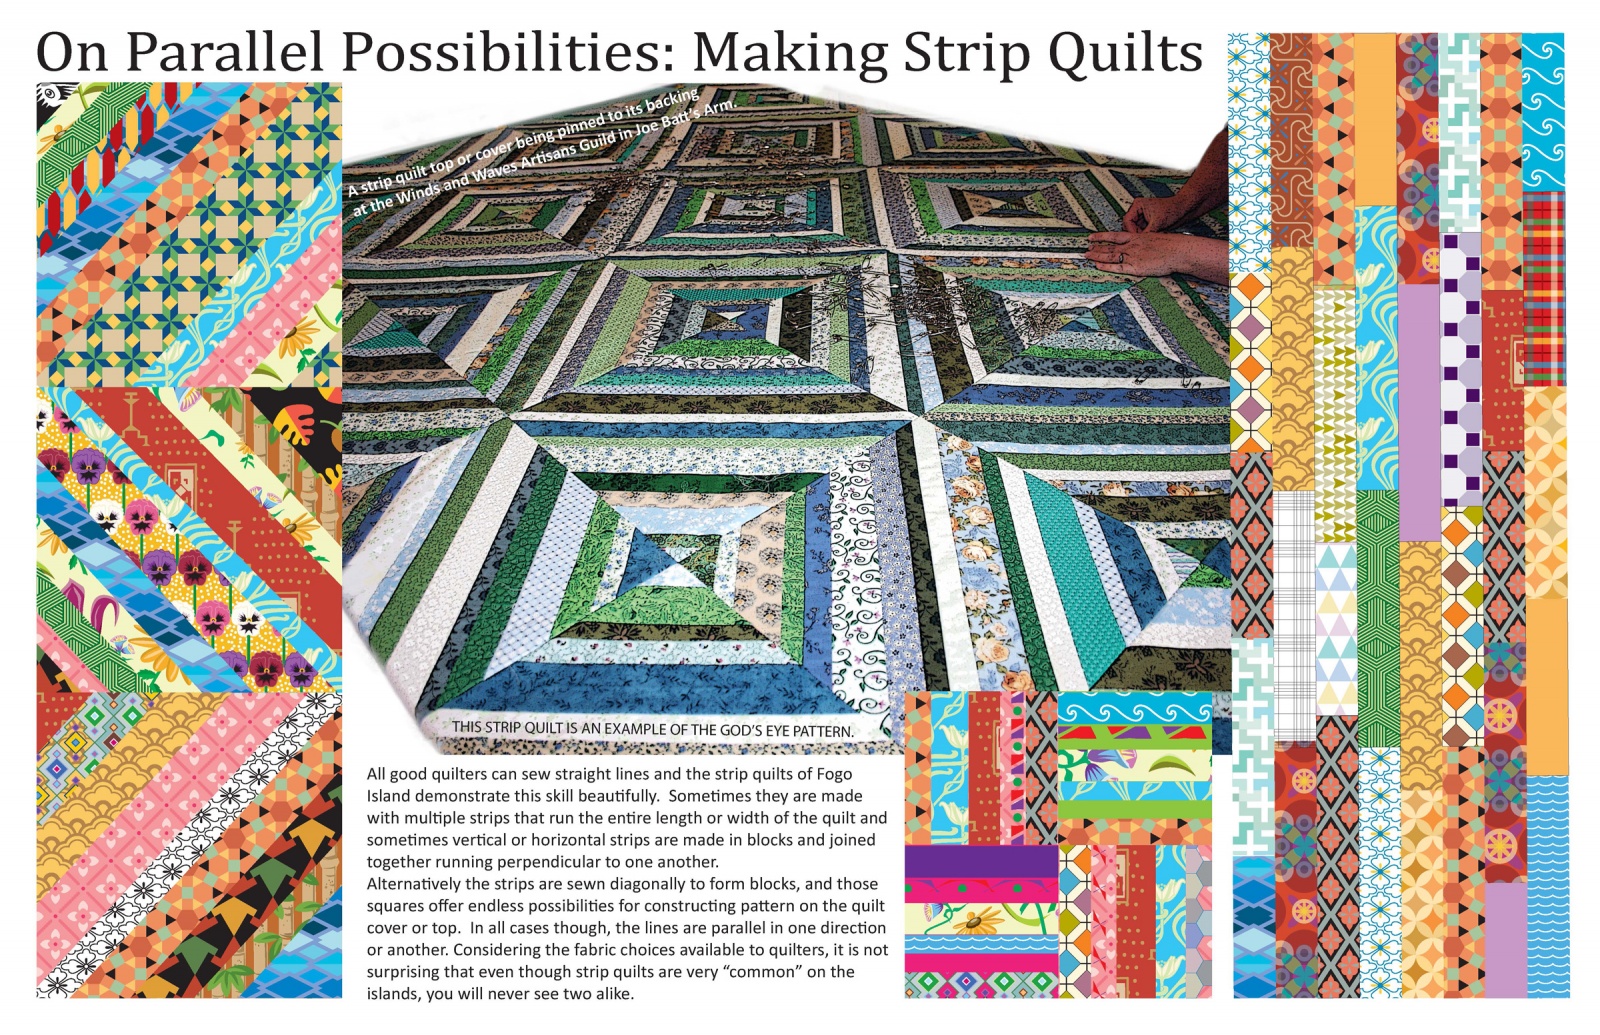 On Parallel Possibilities: Making Strip Quilts